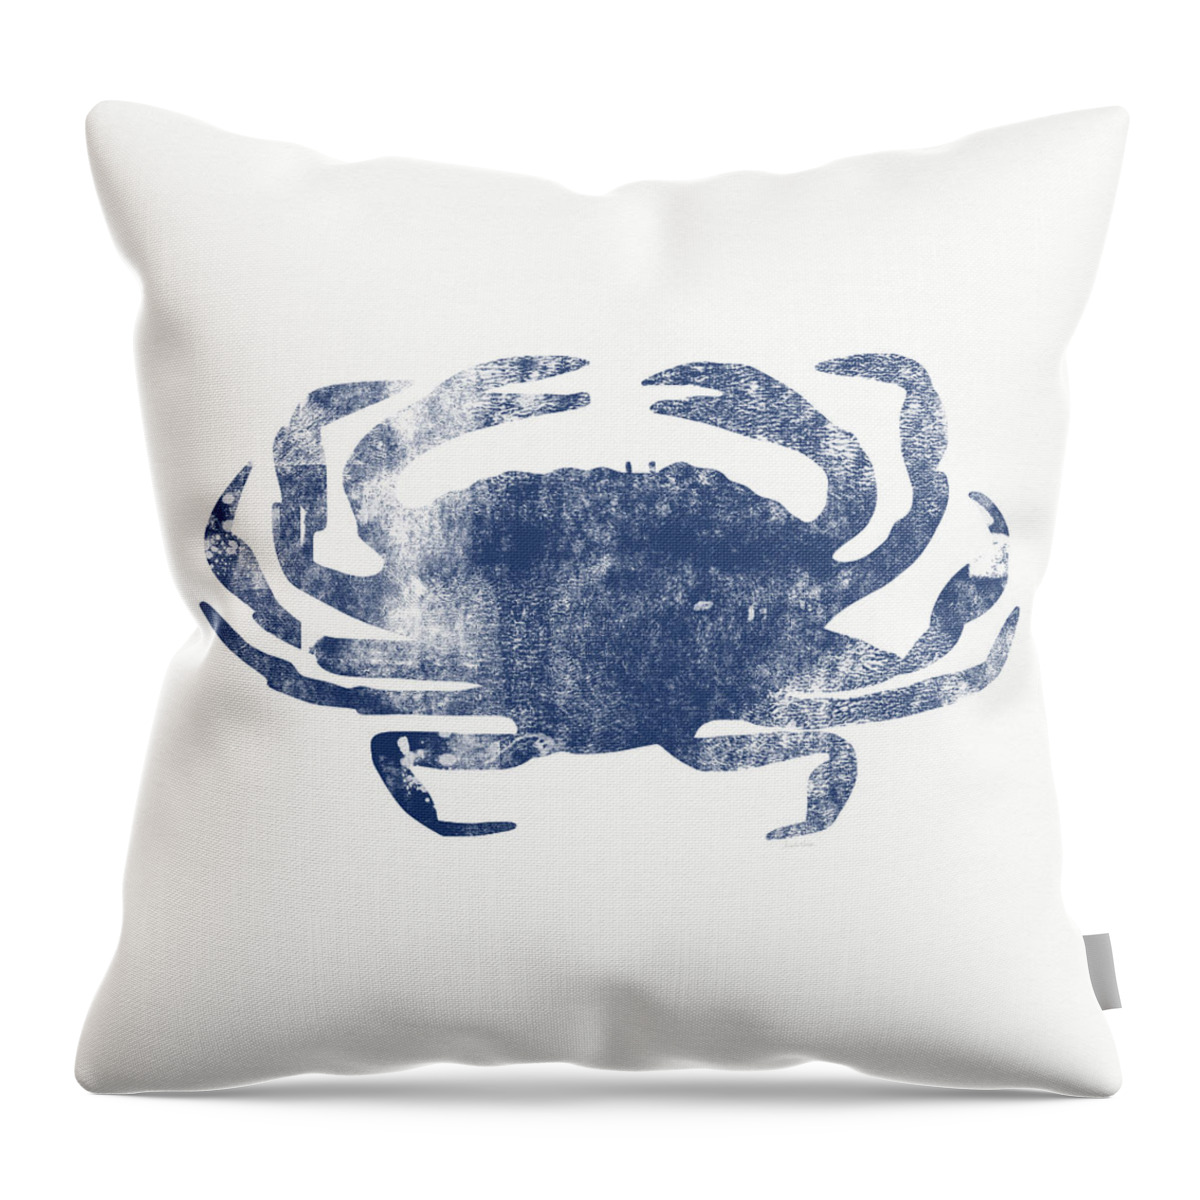 Cape Cod Throw Pillow featuring the painting Blue Crab- Art by Linda Woods by Linda Woods